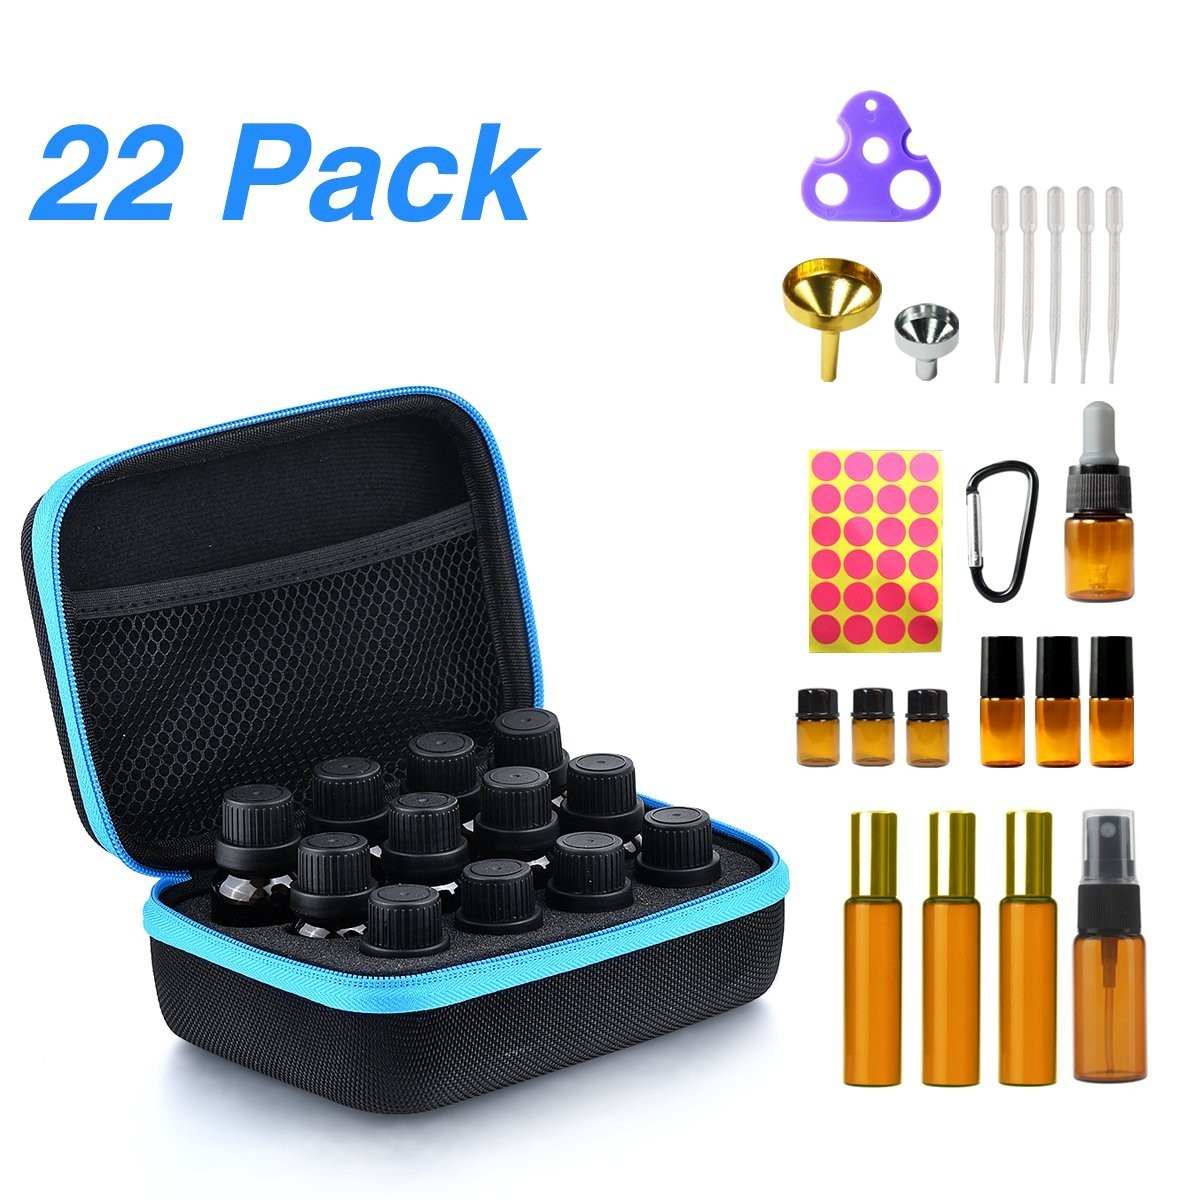 Amazon Essential Oil Portable Carrying Case Bundle DIY Your Own Blend Start Kit Include Blend Bottles Dropper Bottles Rollers Label Sticker and Oil Key